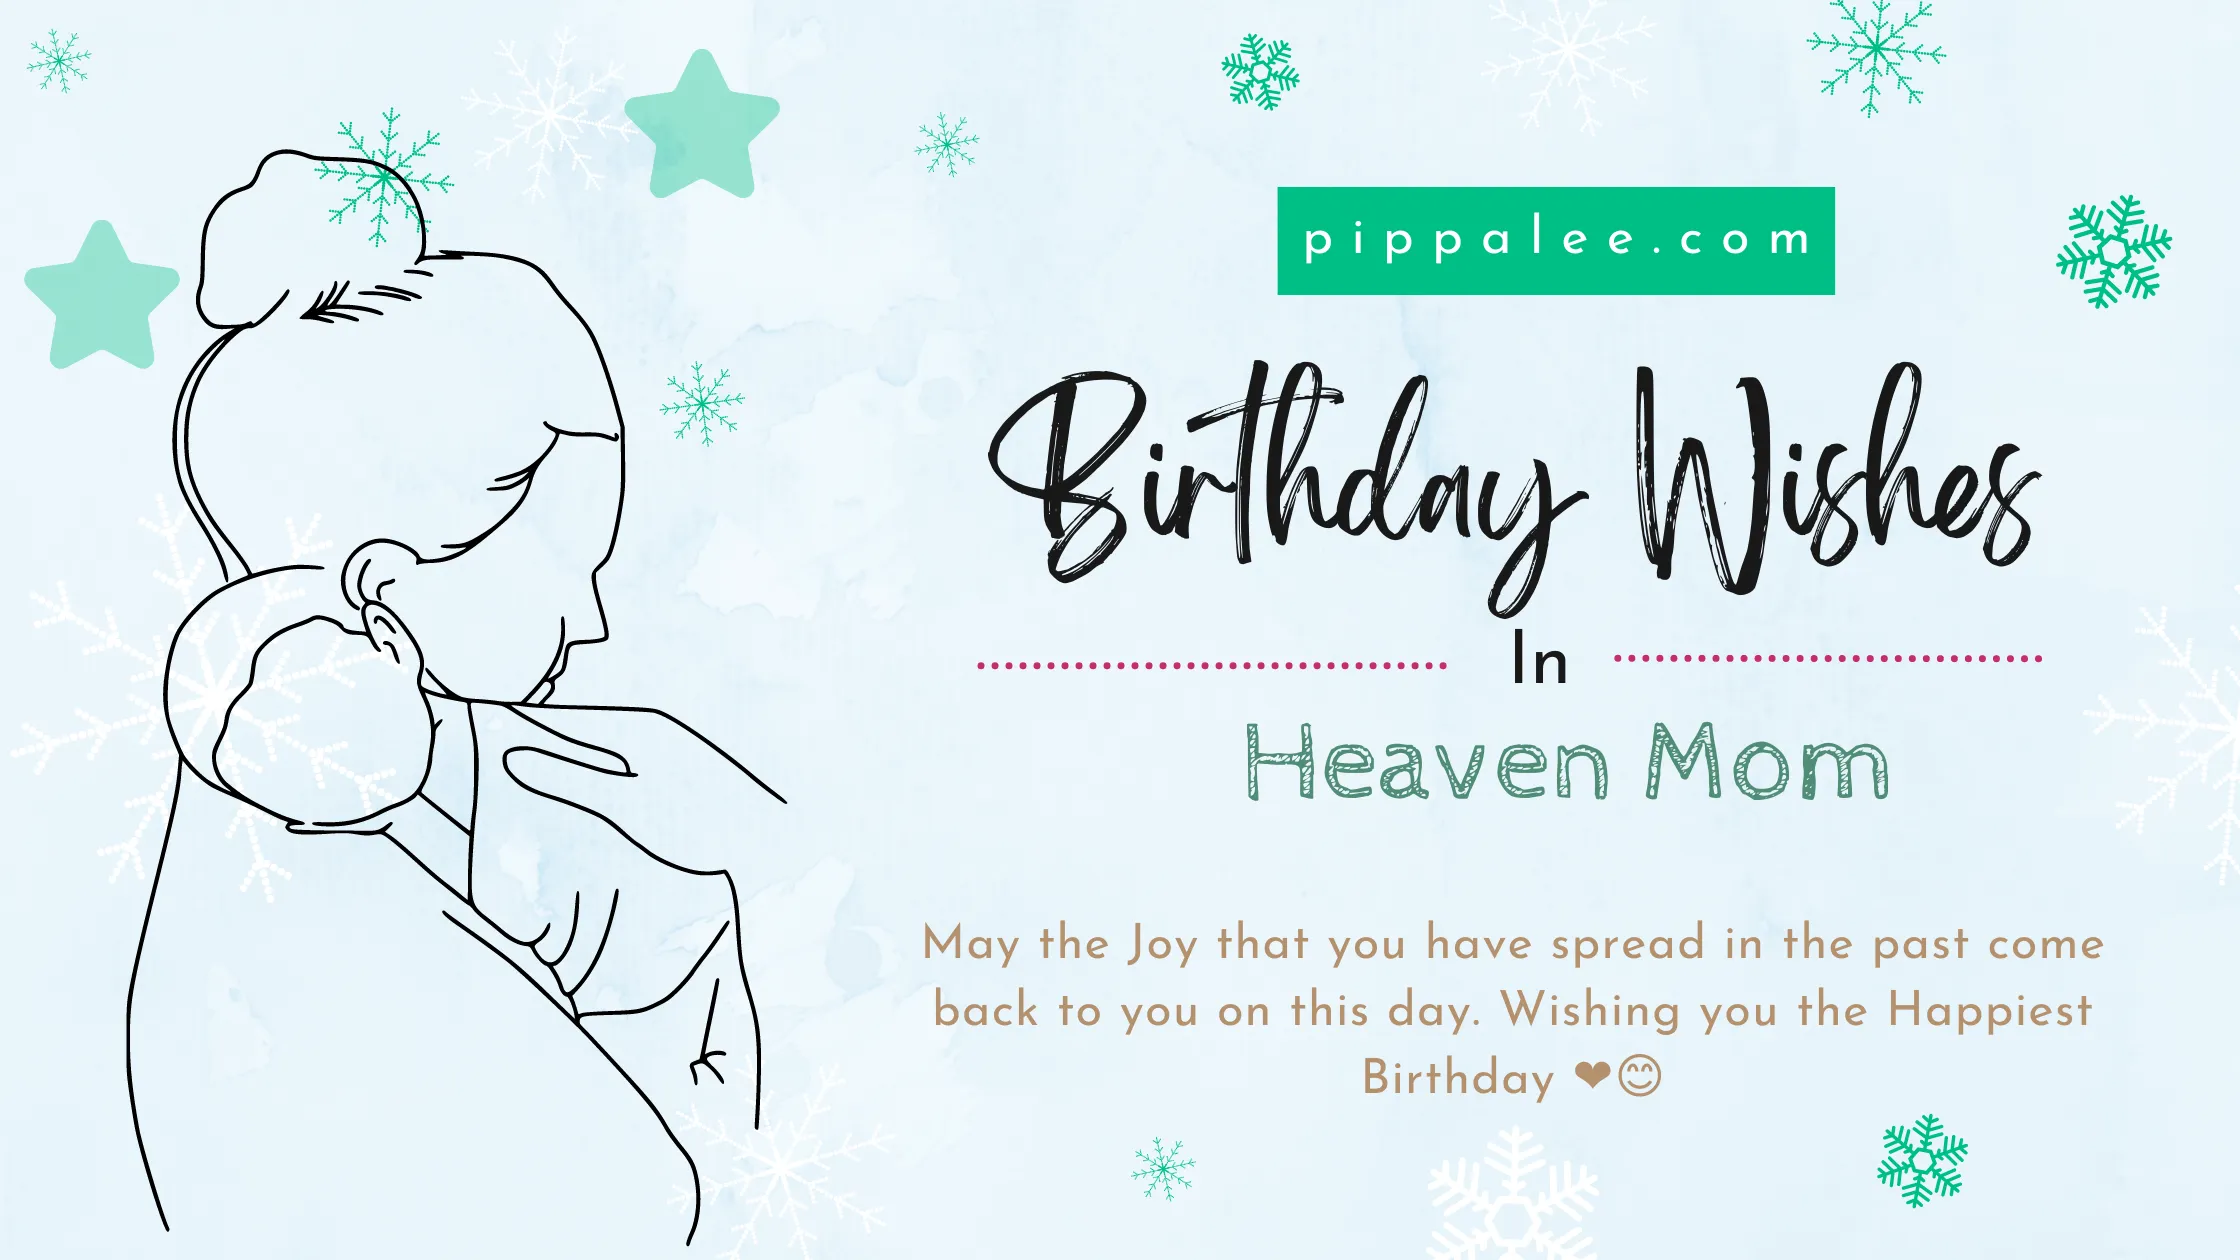 Happy Birthday in Heaven Mom - Wishes & Messages